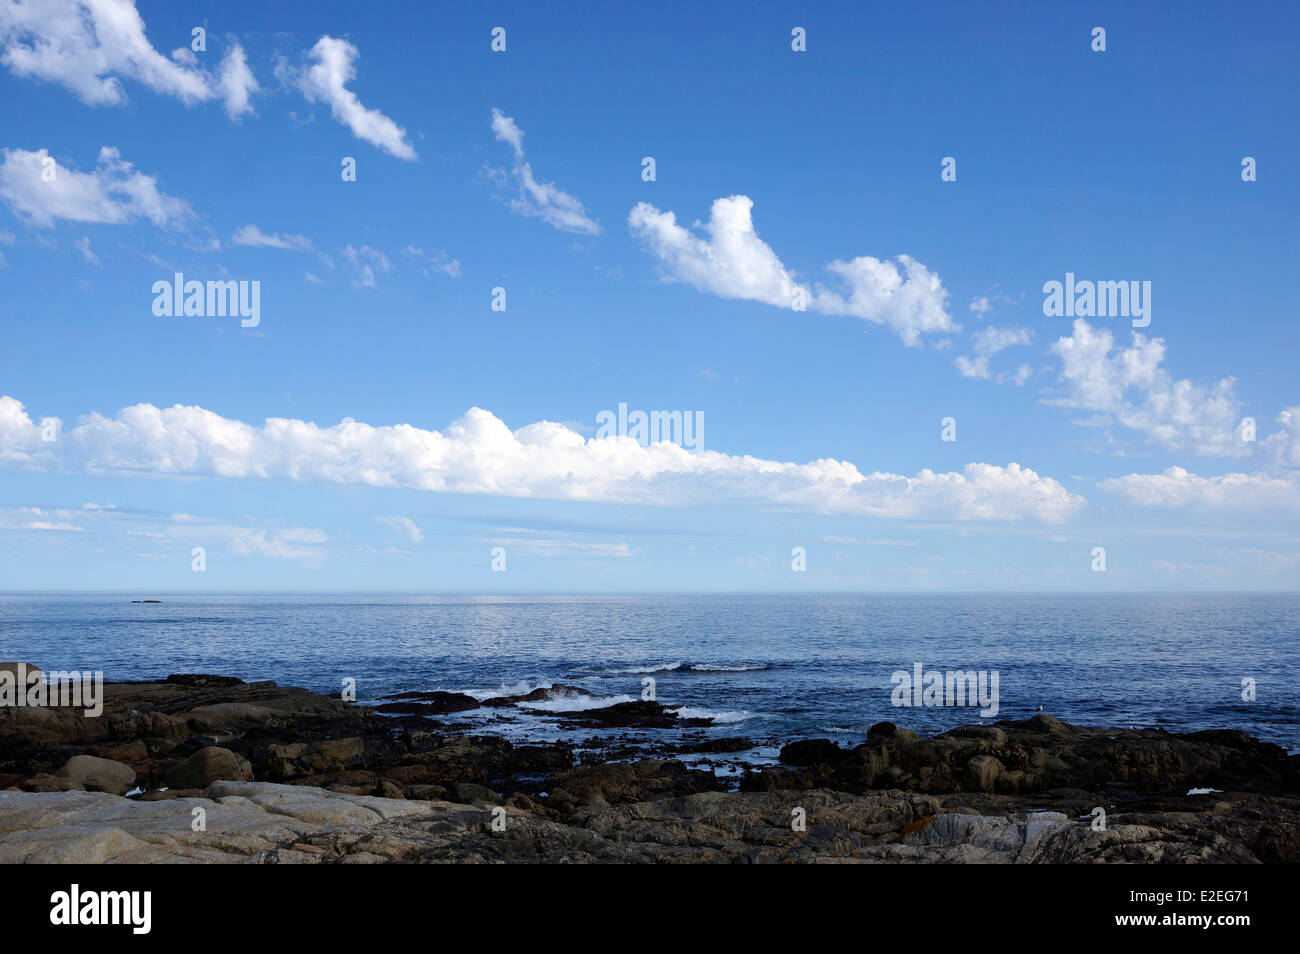 Sea Point beach near Cape Town with view of the Atlantic ocean. Stock Photo